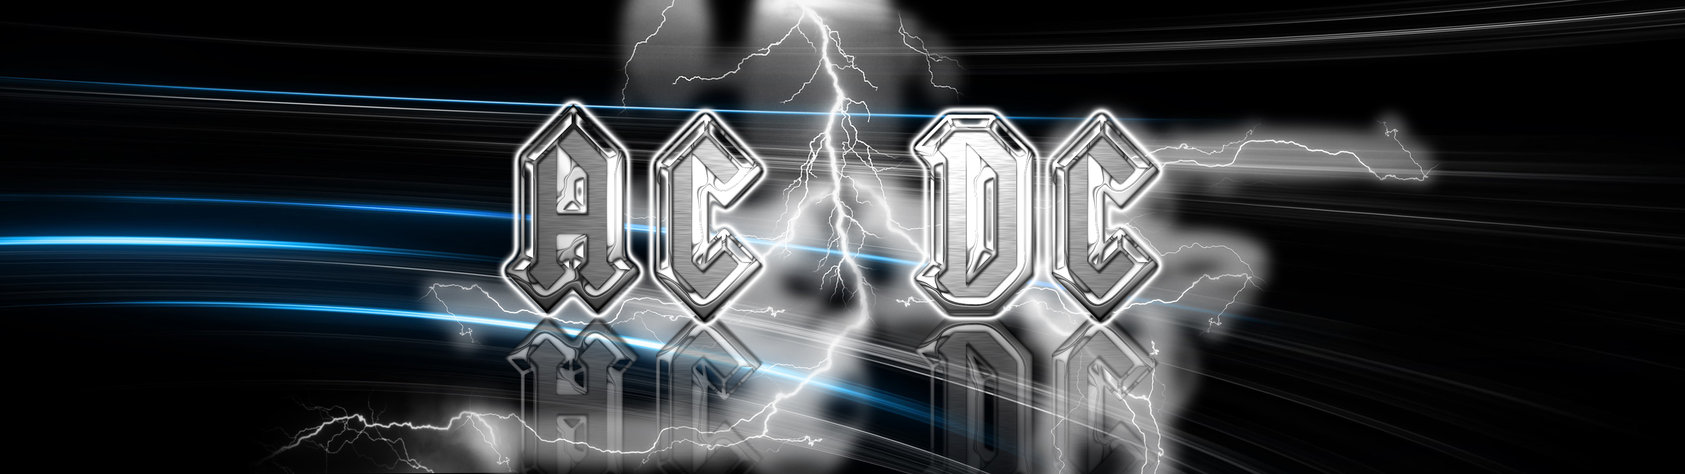 Ac Dc Wallpaper By Bhaal5001